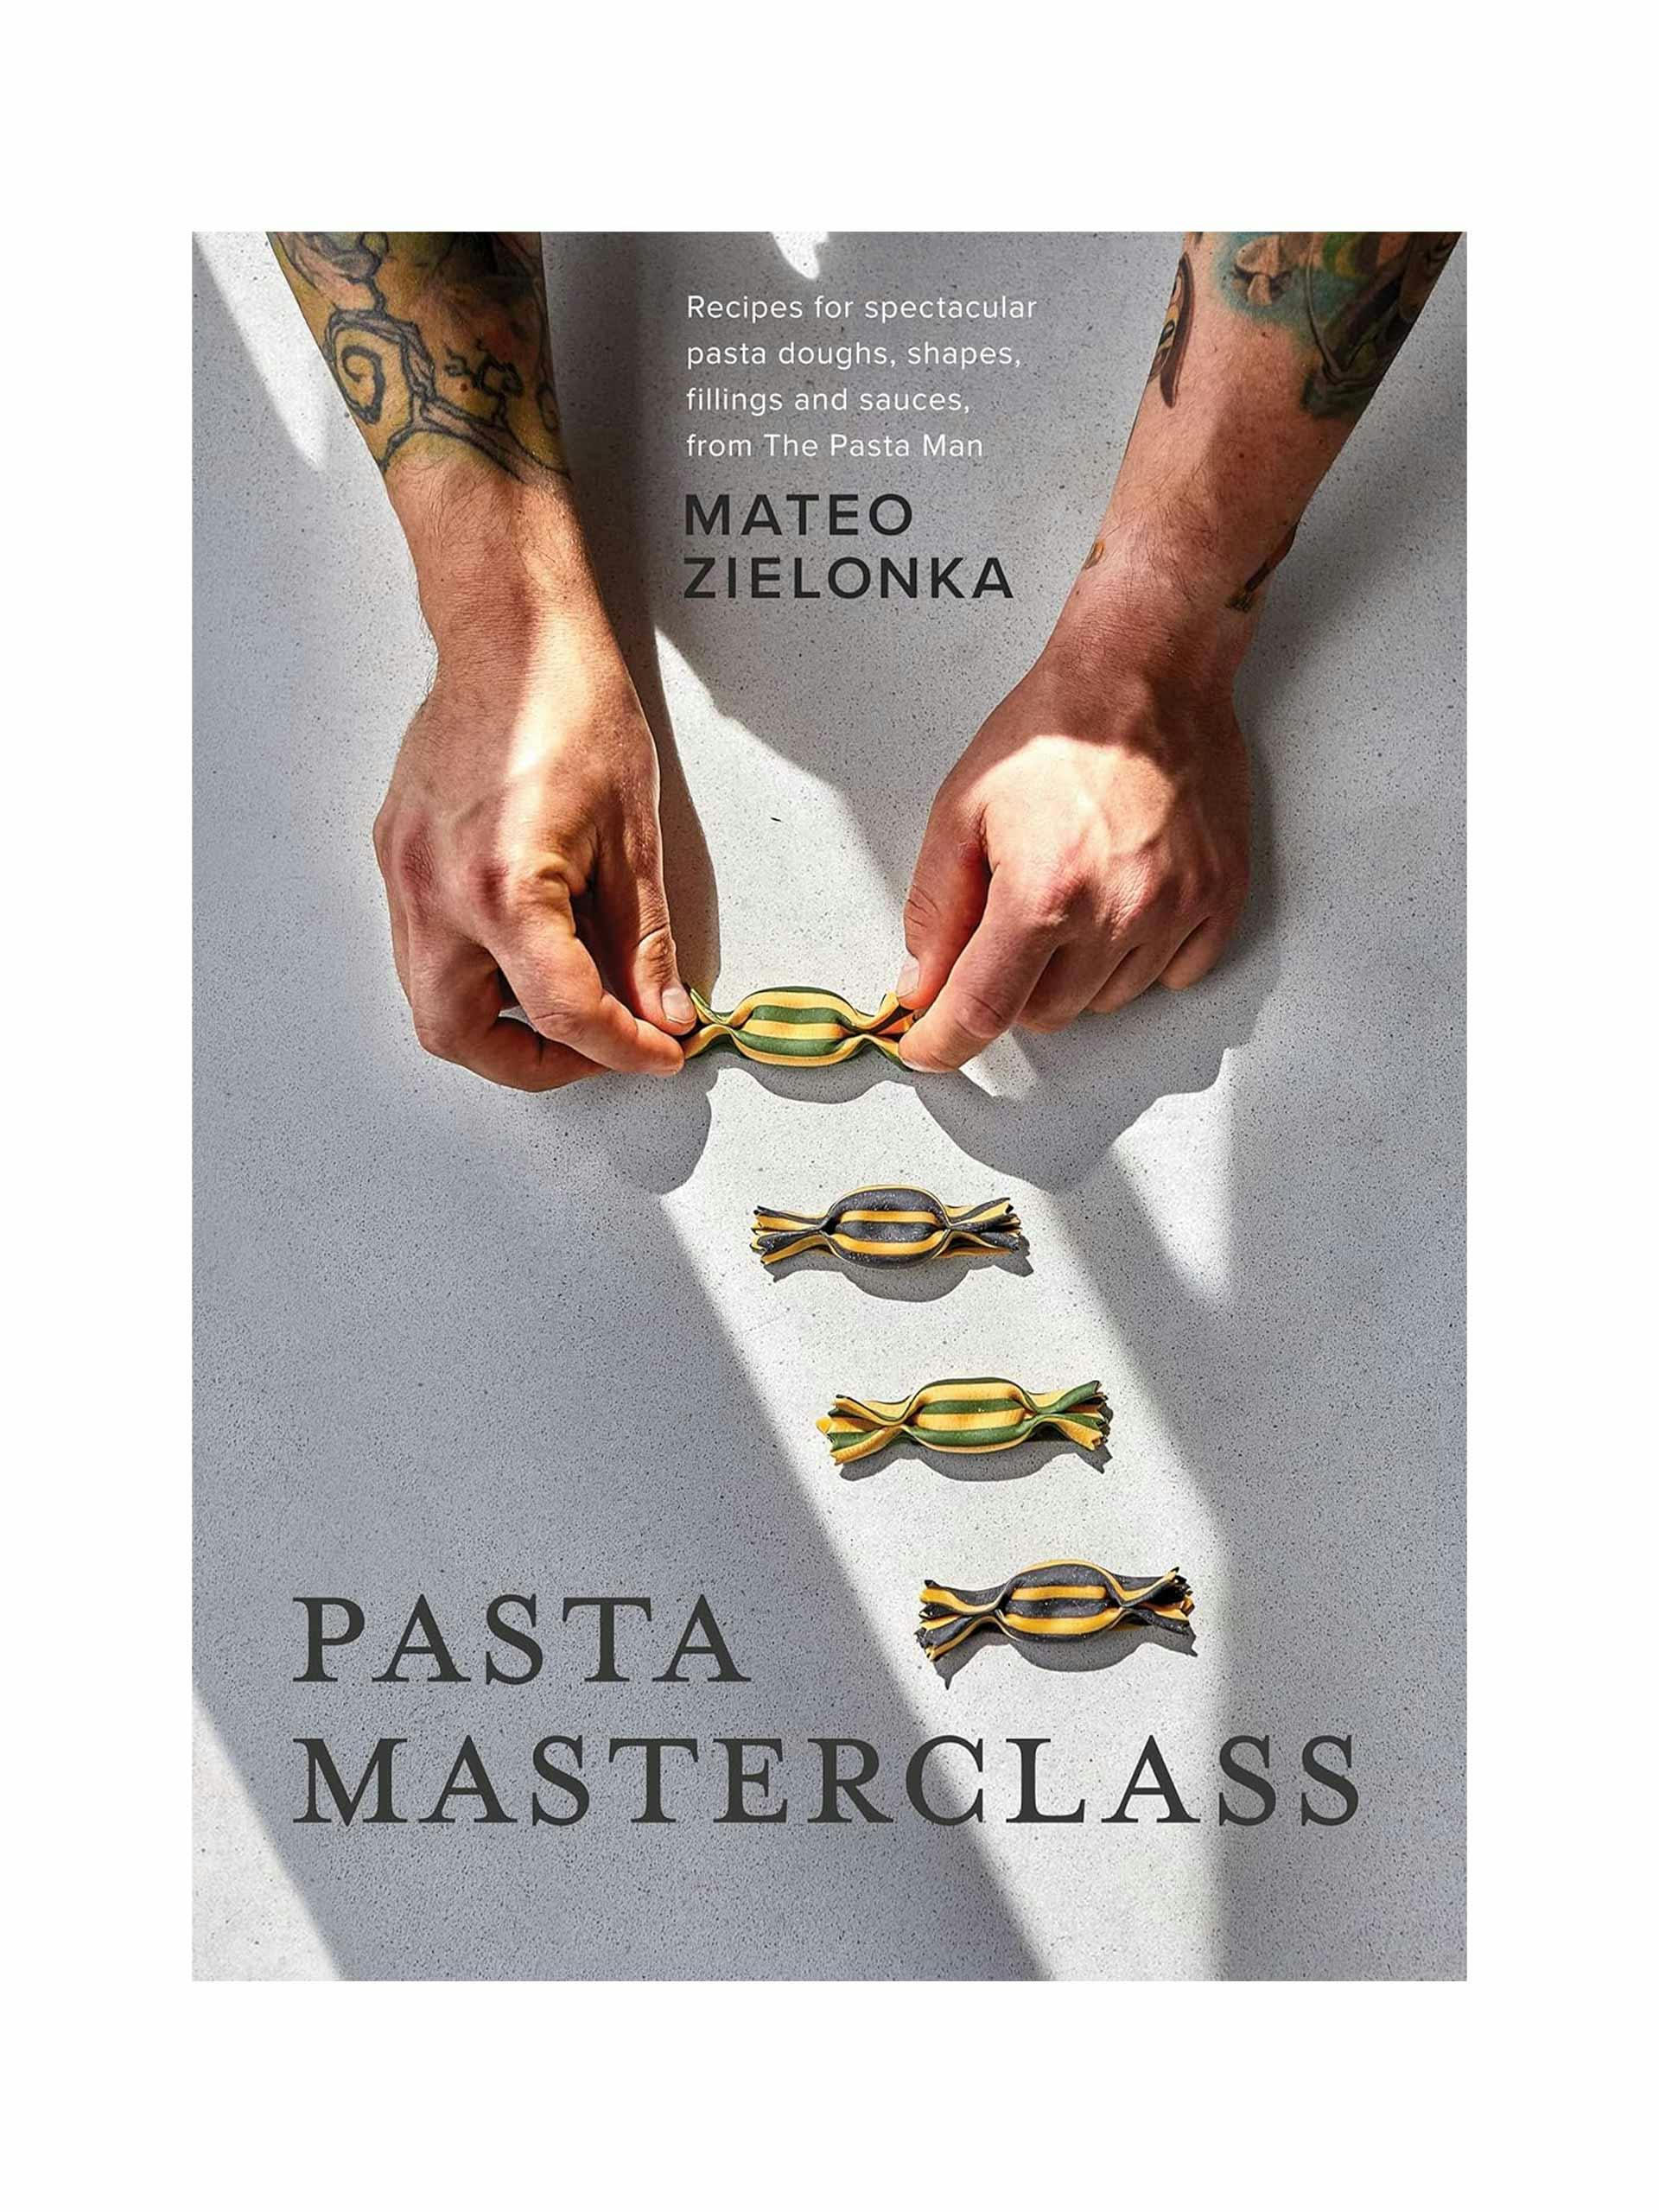 Pasta Masterclass: recipes for spectacular pasta doughs, shapes, fillings and sauces